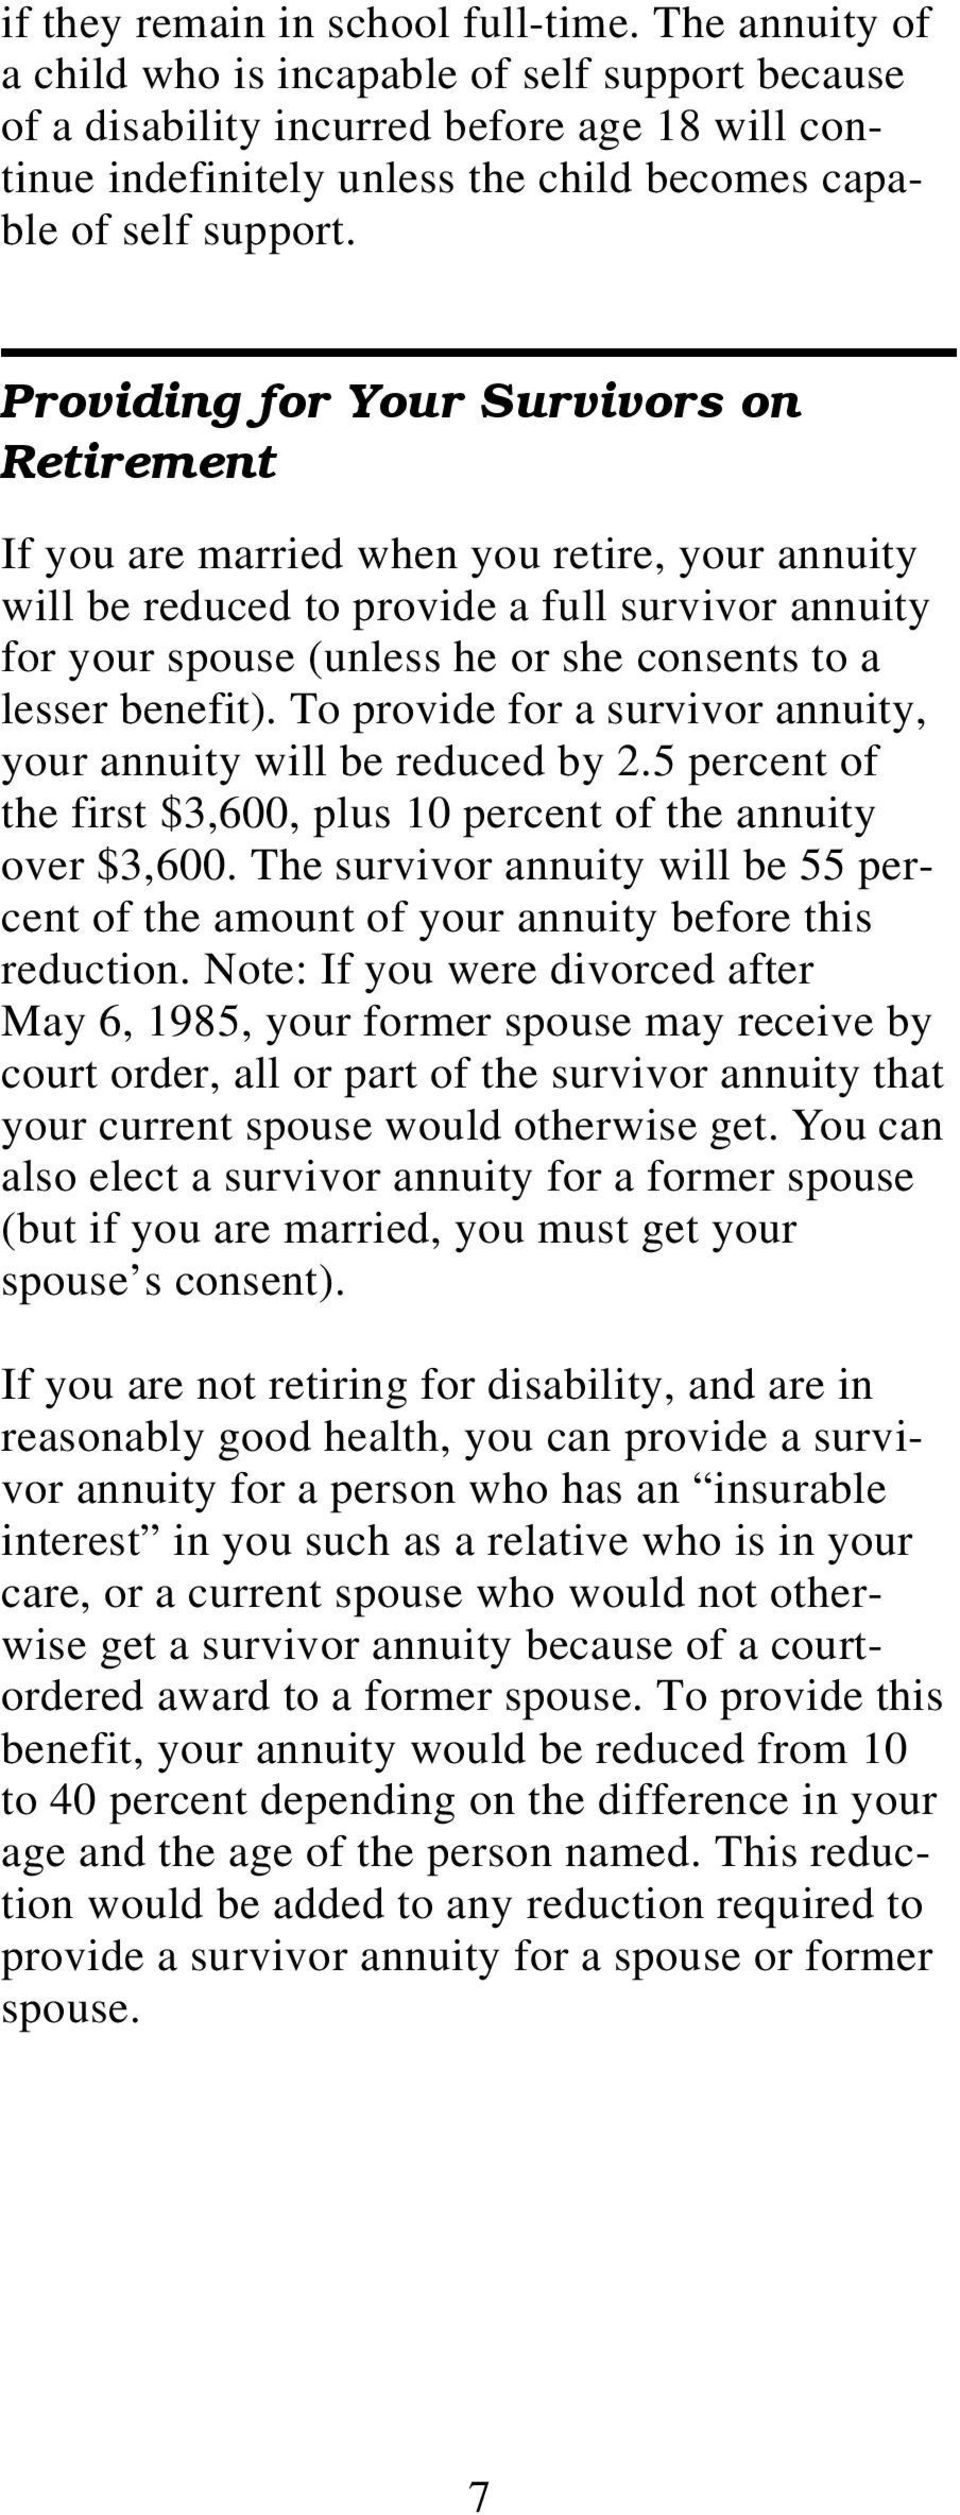 Providing for Your Survivors on Retirement If you are married when you retire, your annuity will be reduced to provide a full survivor annuity for your spouse (unless he or she consents to a lesser